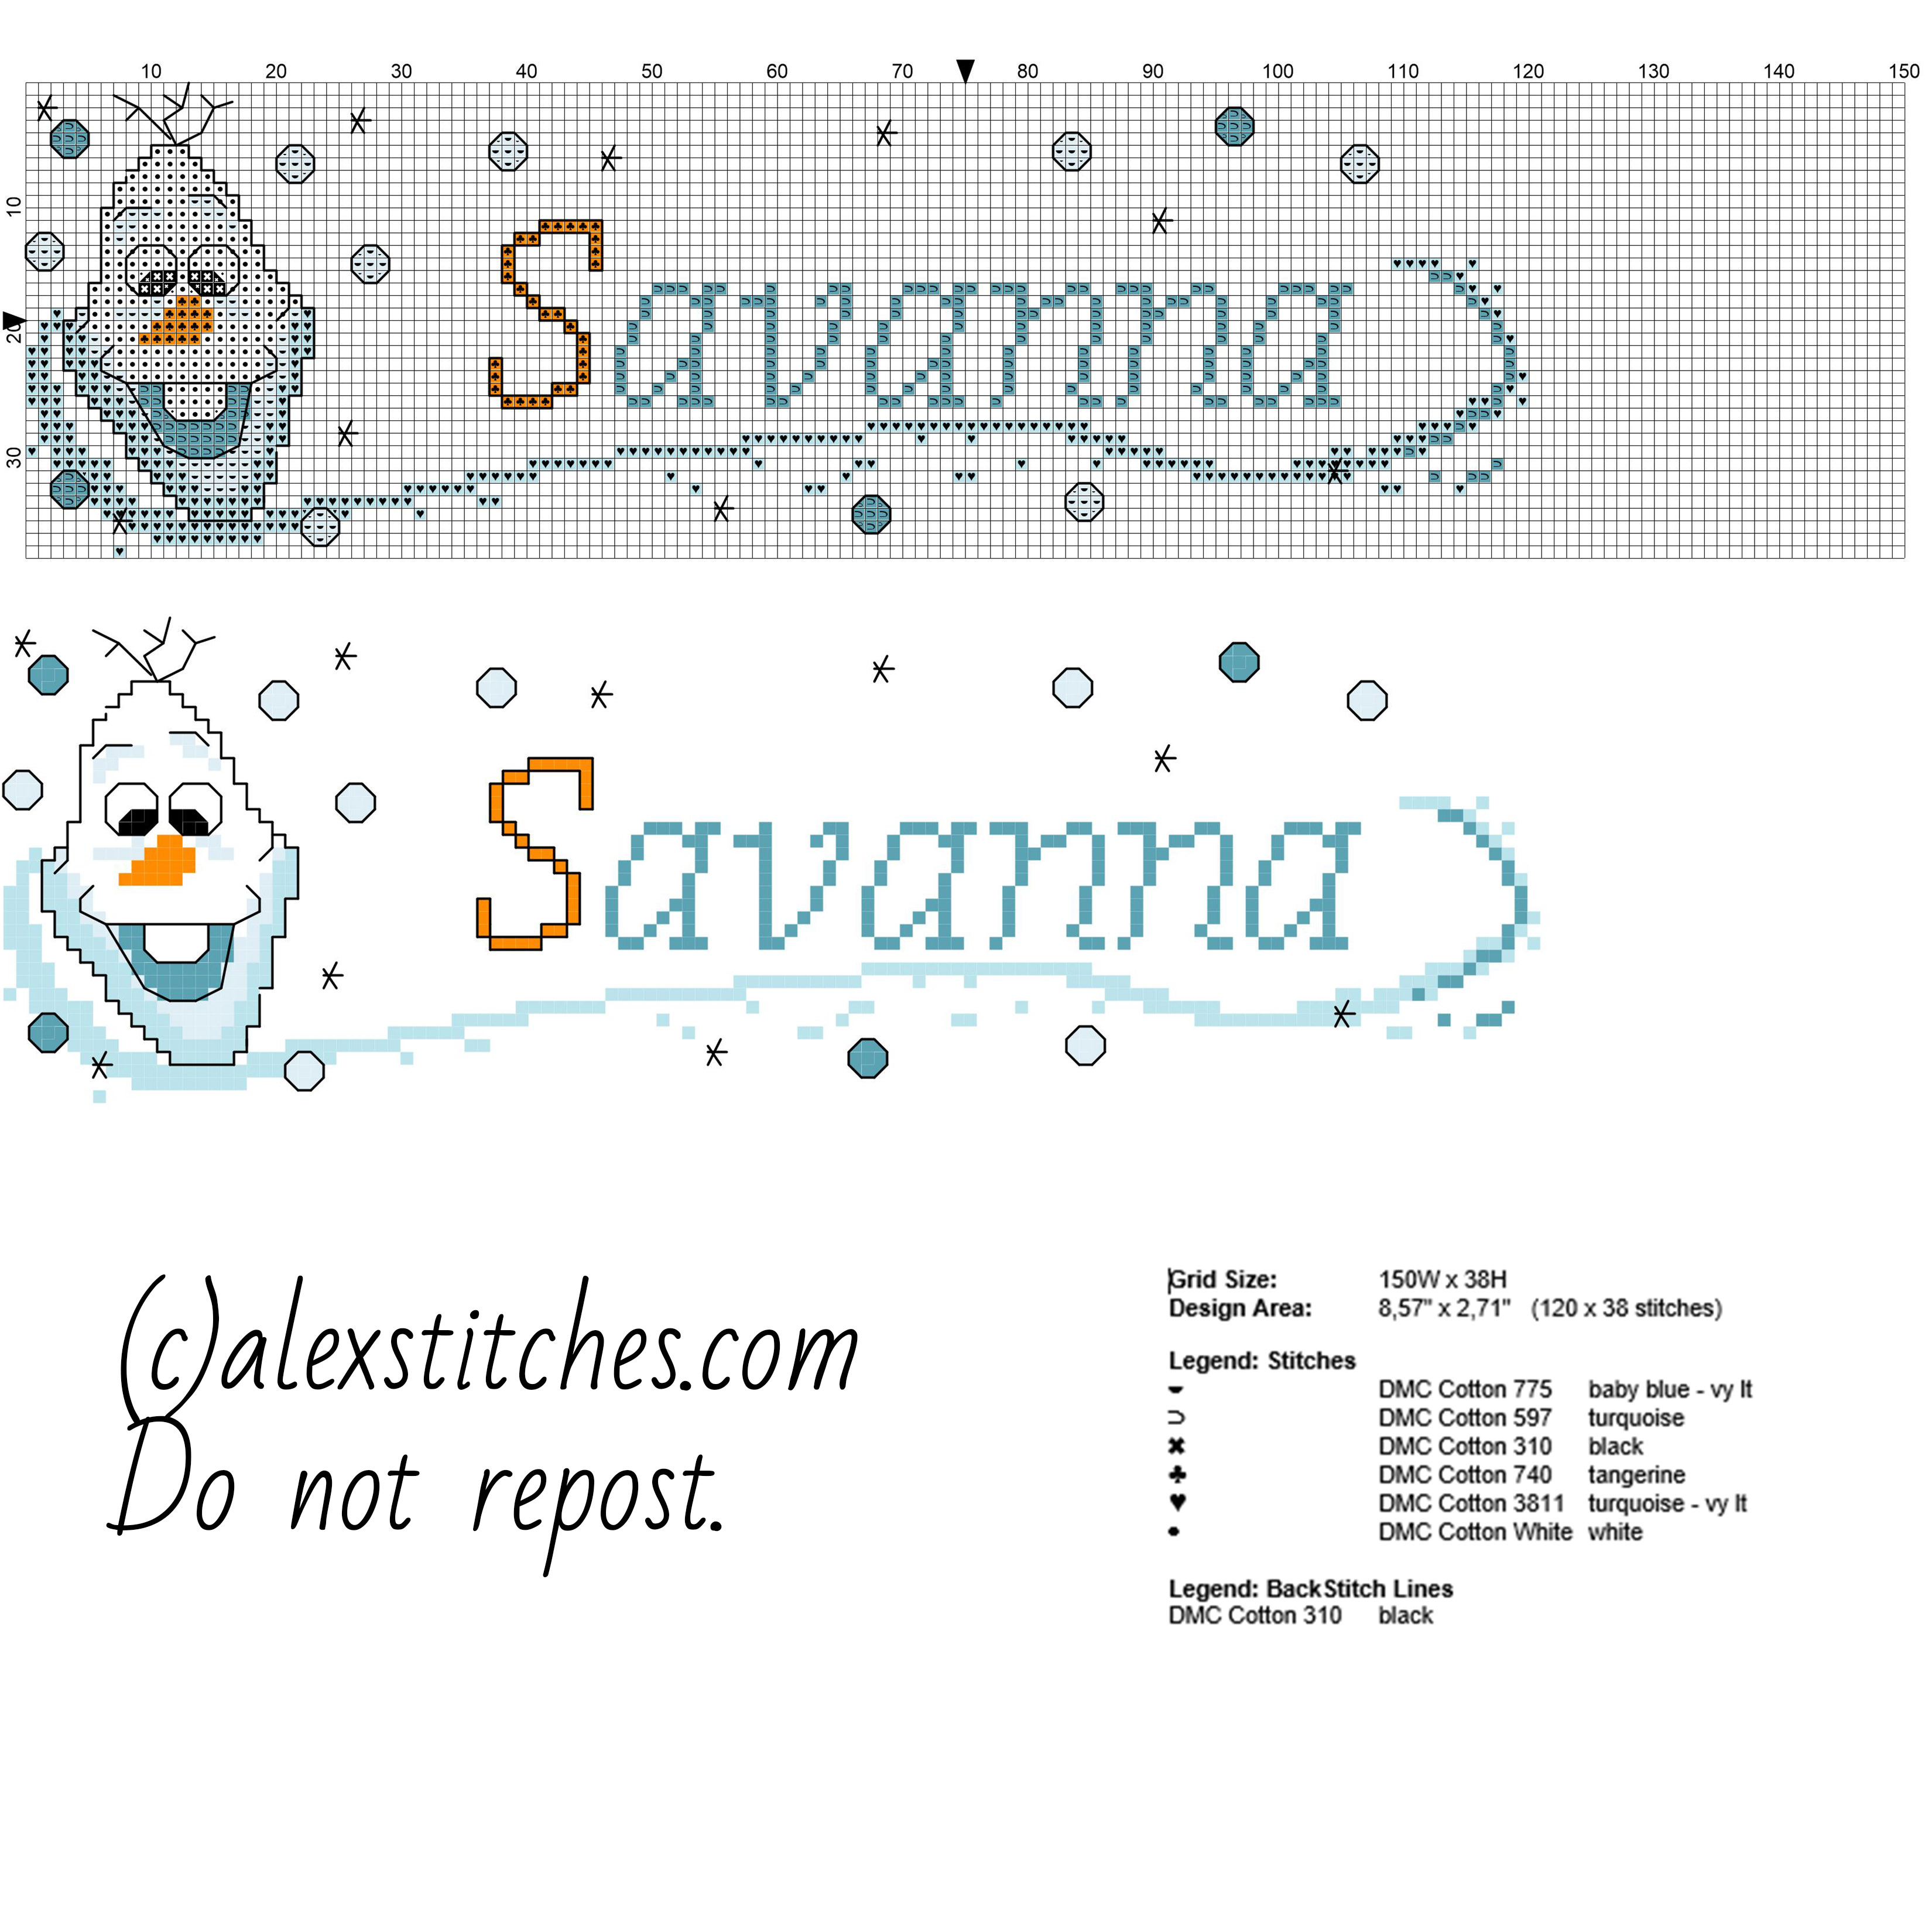 Cross stitch baby name Savanna with Olaf character from Disney Frozen cartoon